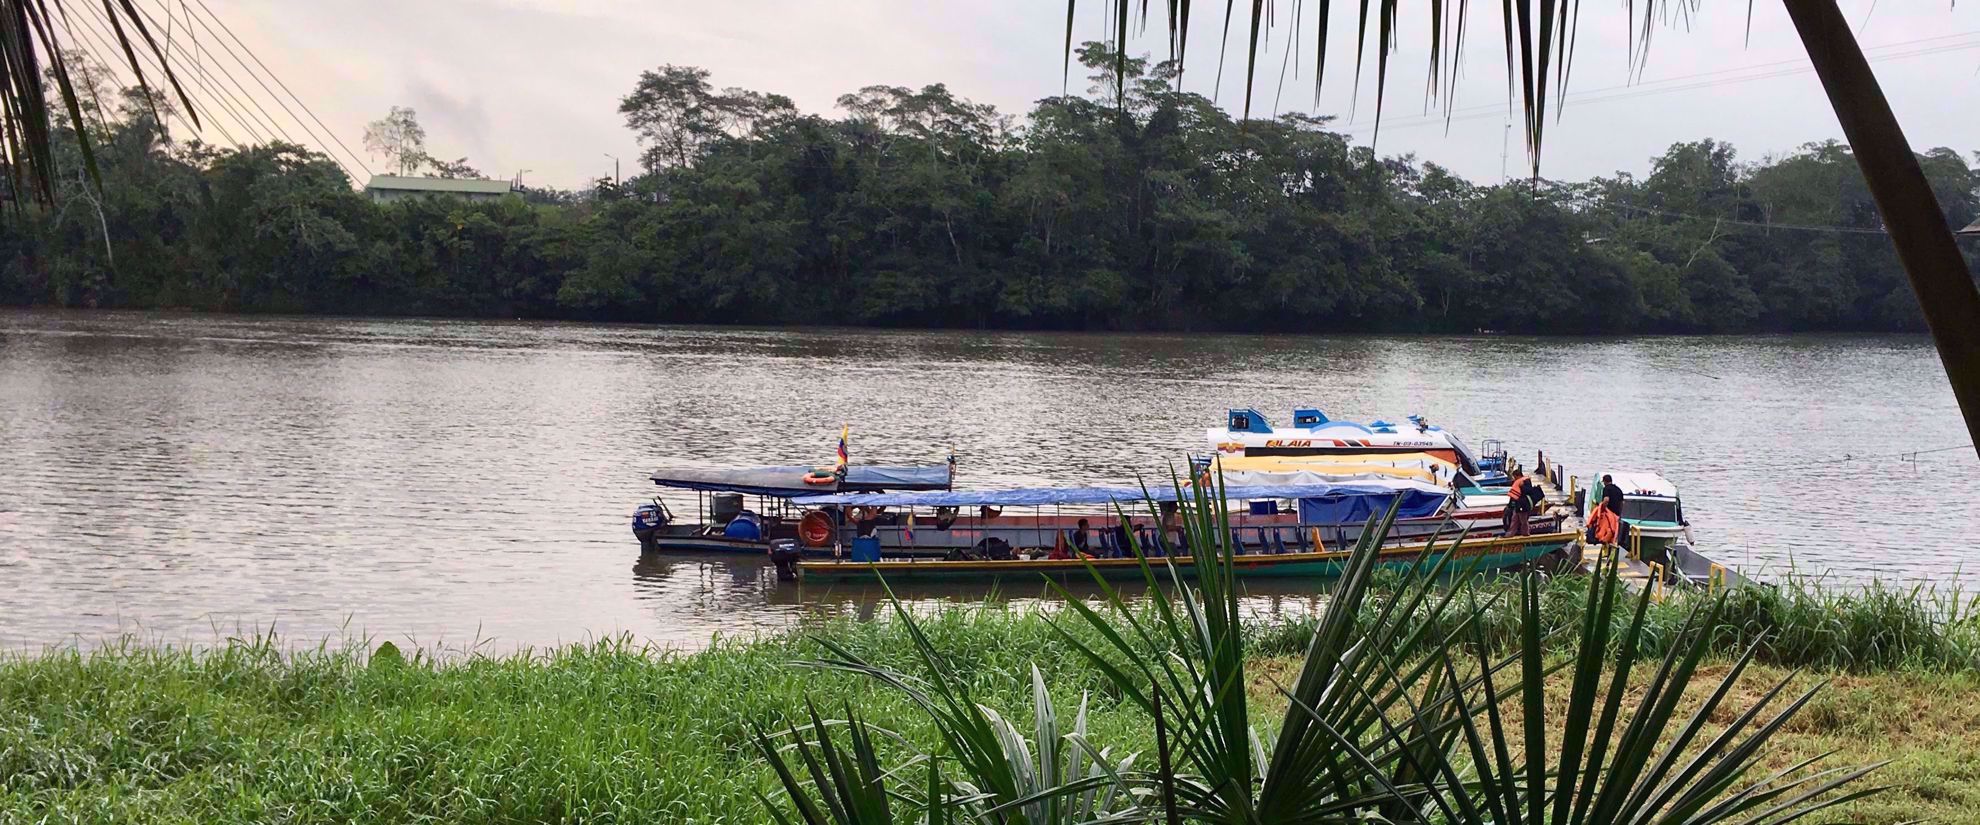 riverboats docked in the amazon river